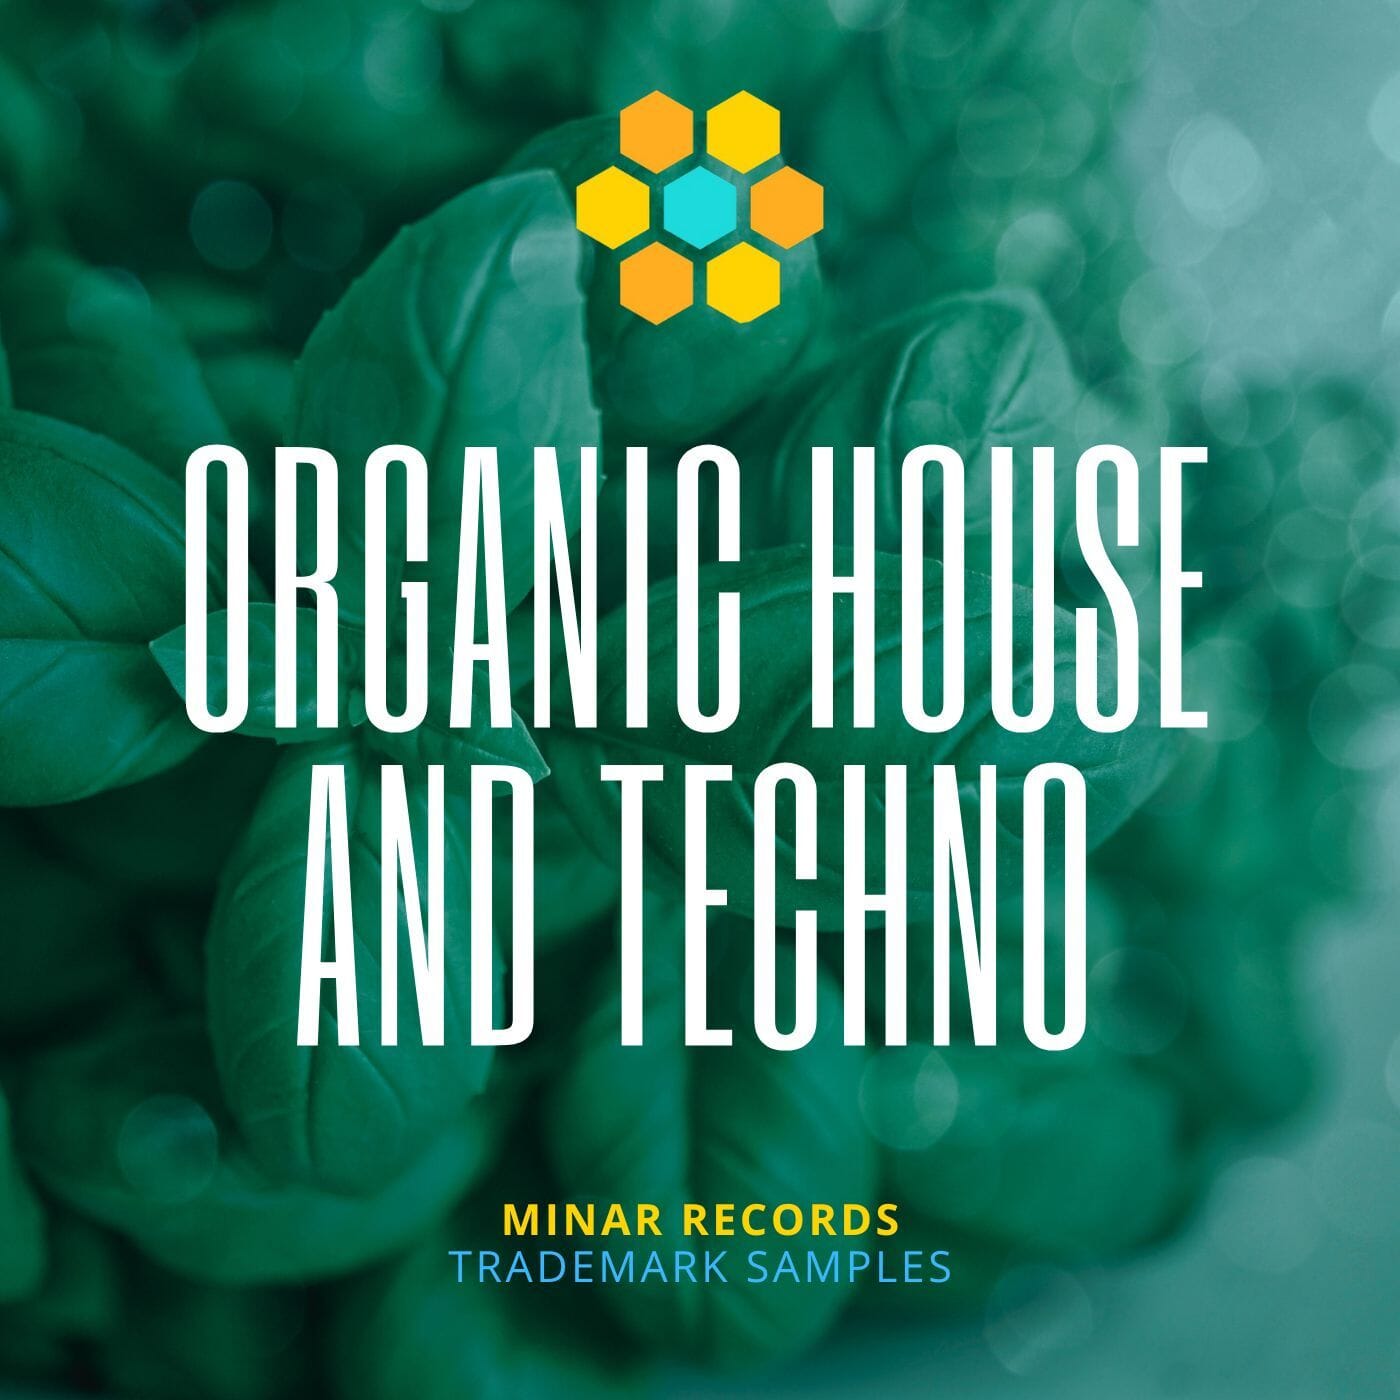 Organic House and Techno (Loops and One Hits) Sample Pack Minar Records